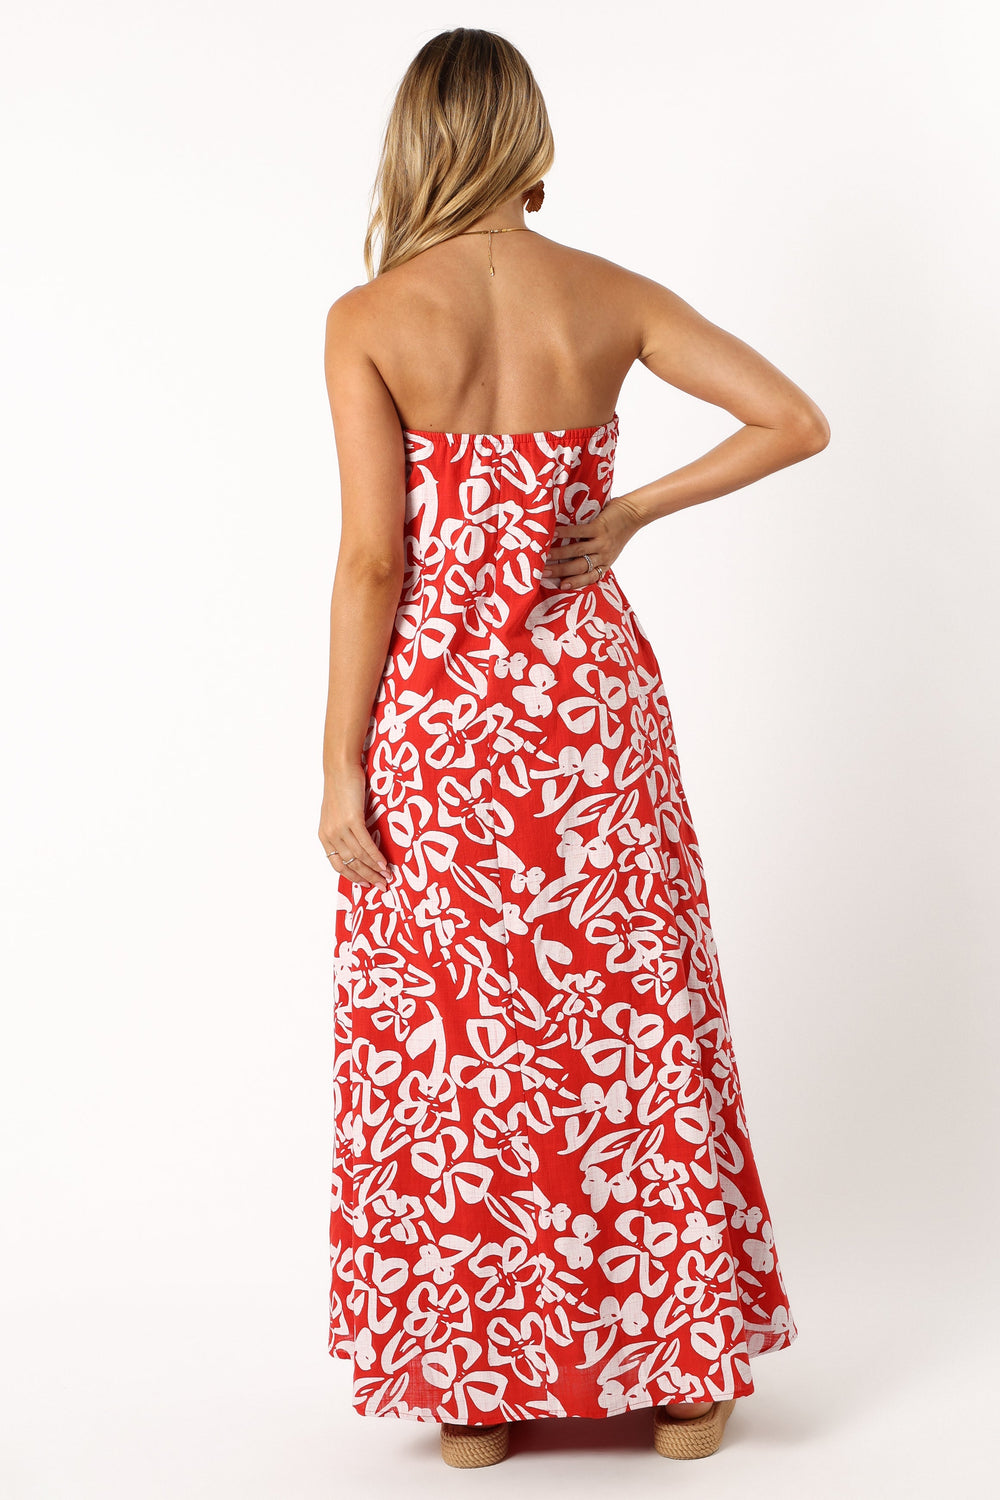 DRESSES @Soph Strapless Maxi Dress - Red Floral